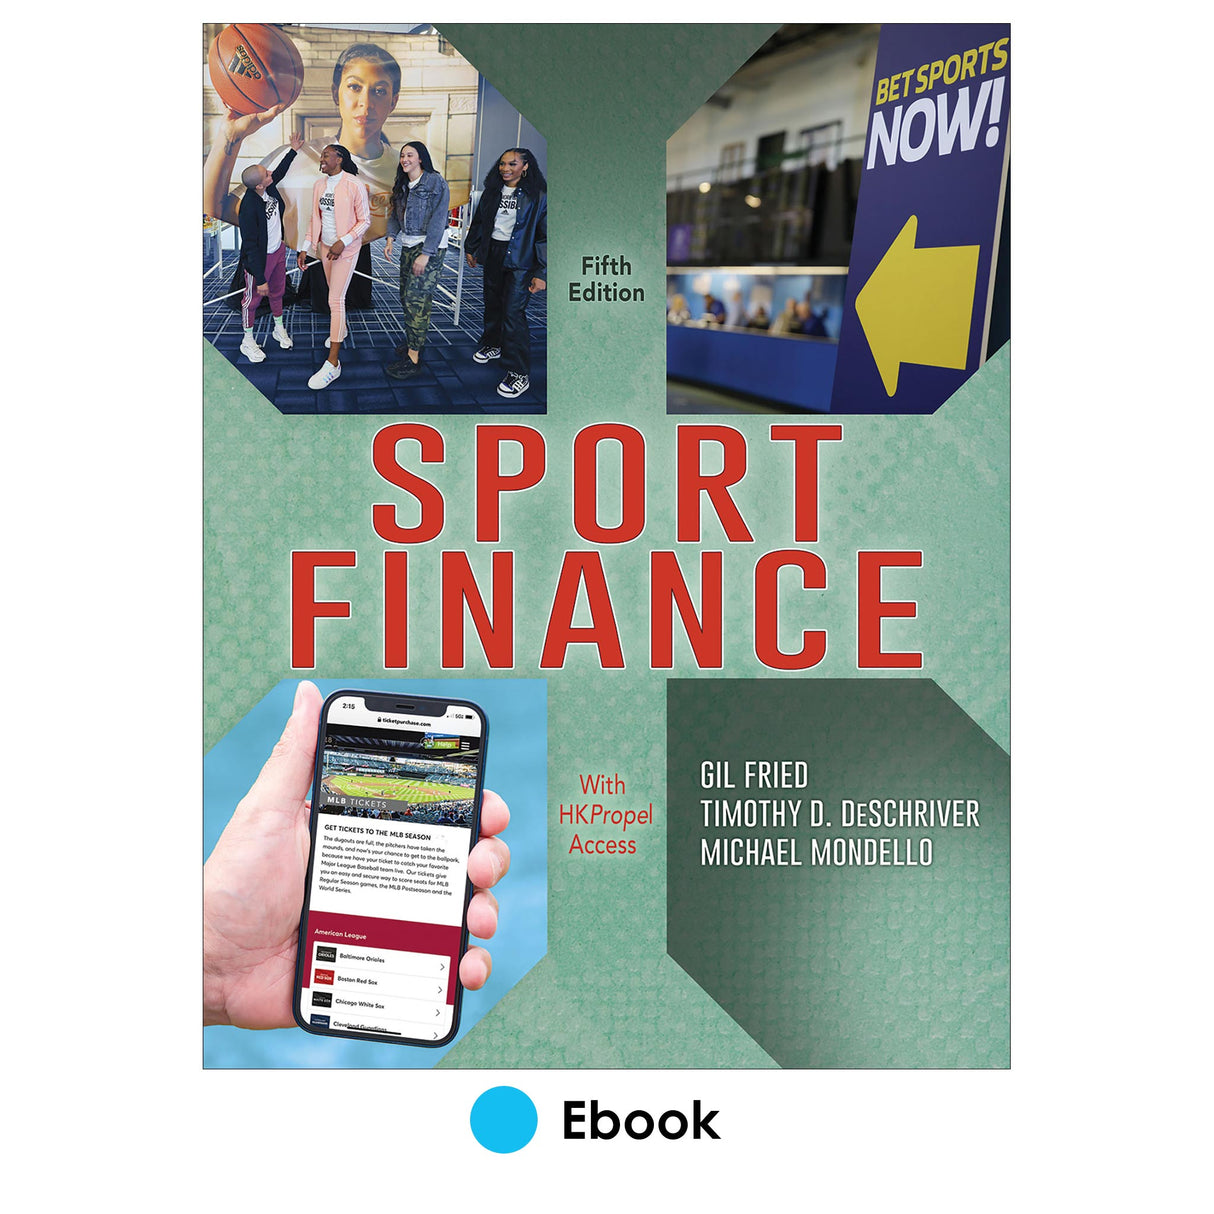 Sport Finance 5th Edition Ebook With HKPropel Access